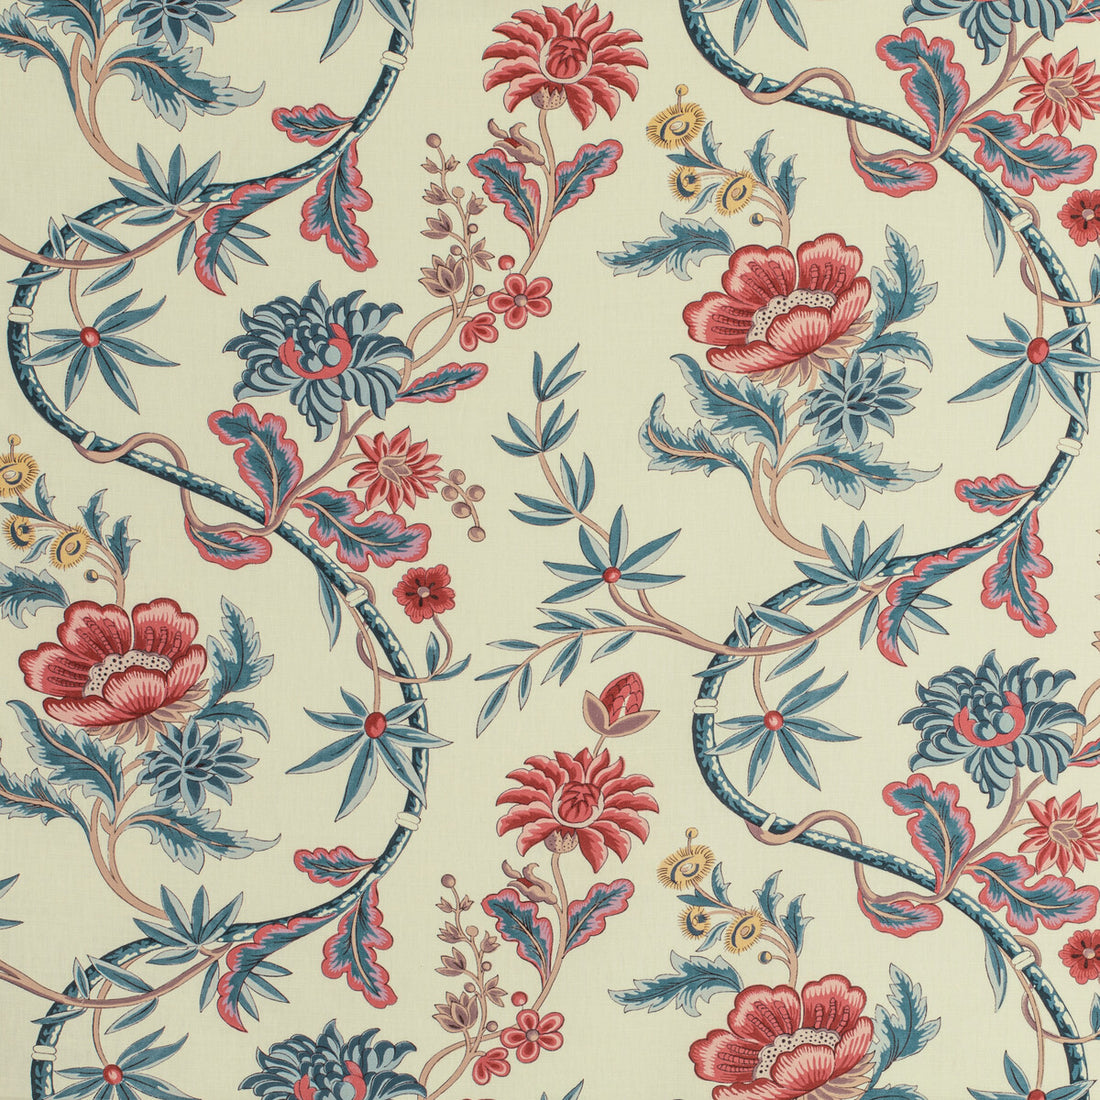 Veronique Print fabric in blue color - pattern 8020122.195.0 - by Brunschwig &amp; Fils in the Louverne collection